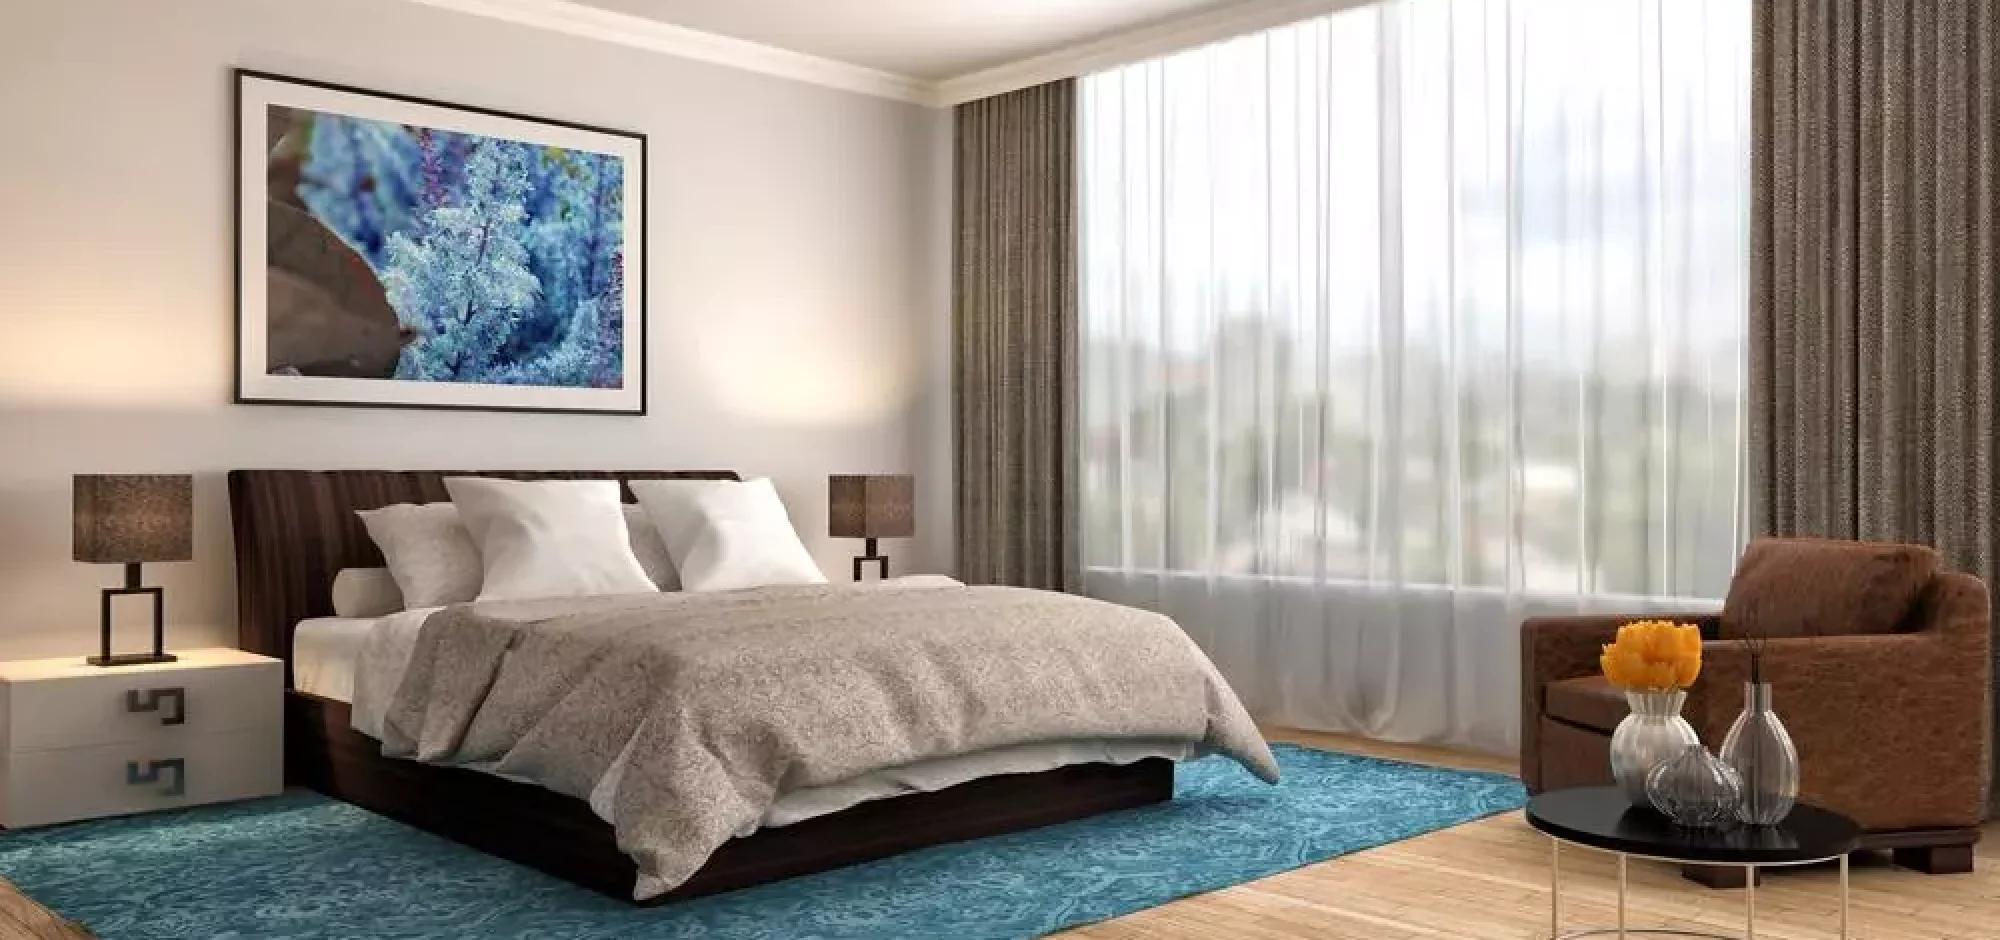 5 Ideas For Designing An Urban Modern Bedroom For Your Tampa Home